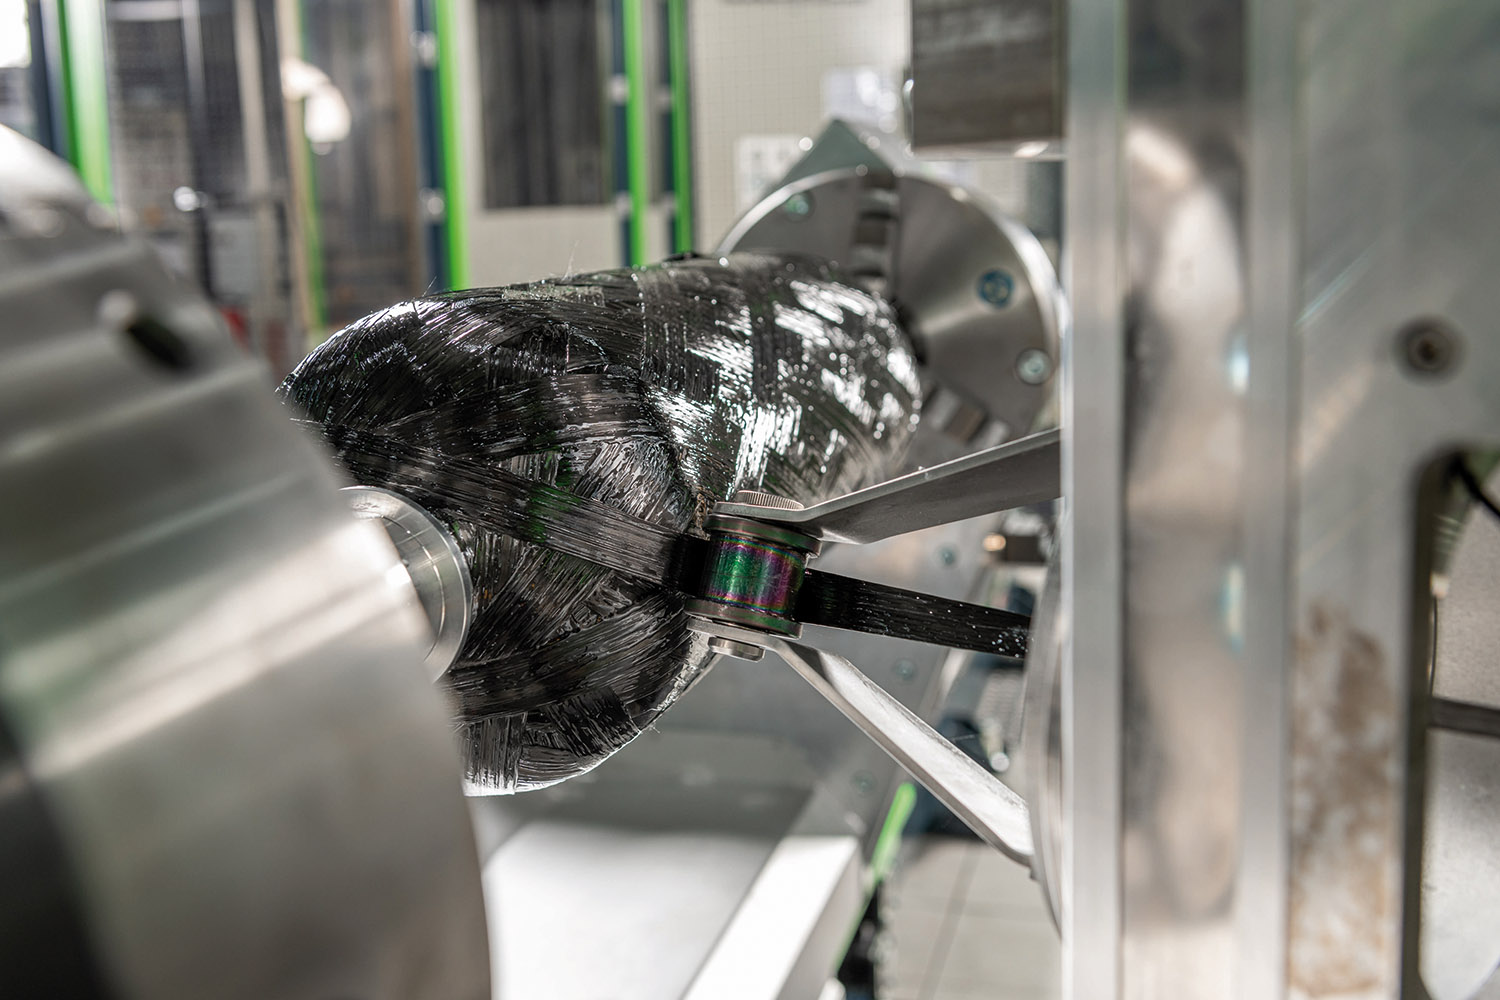 At the Plastics Innovation Center 4.0 was possible to see a robotic filament winding by fiber-reinforced plastics (frp). The manufacturing cell showed a pilot production of type-4 pressure vessel (700bar) for hydrogen storage, scaled 47% from the real process (1500bar). During the 32nd IKV Colloquium. 